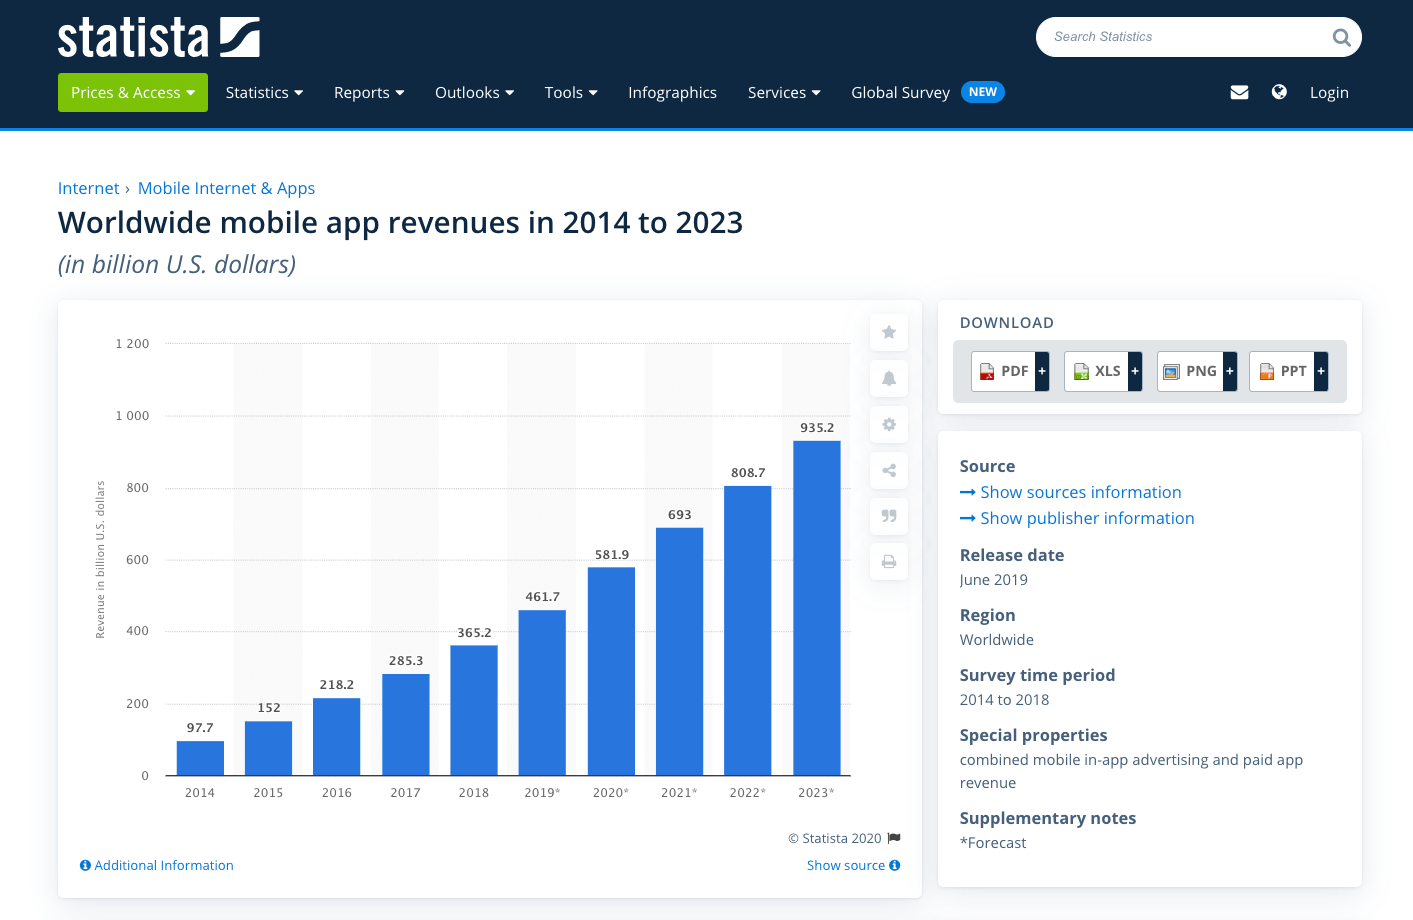 a picture showing worldwide mobile app revenues